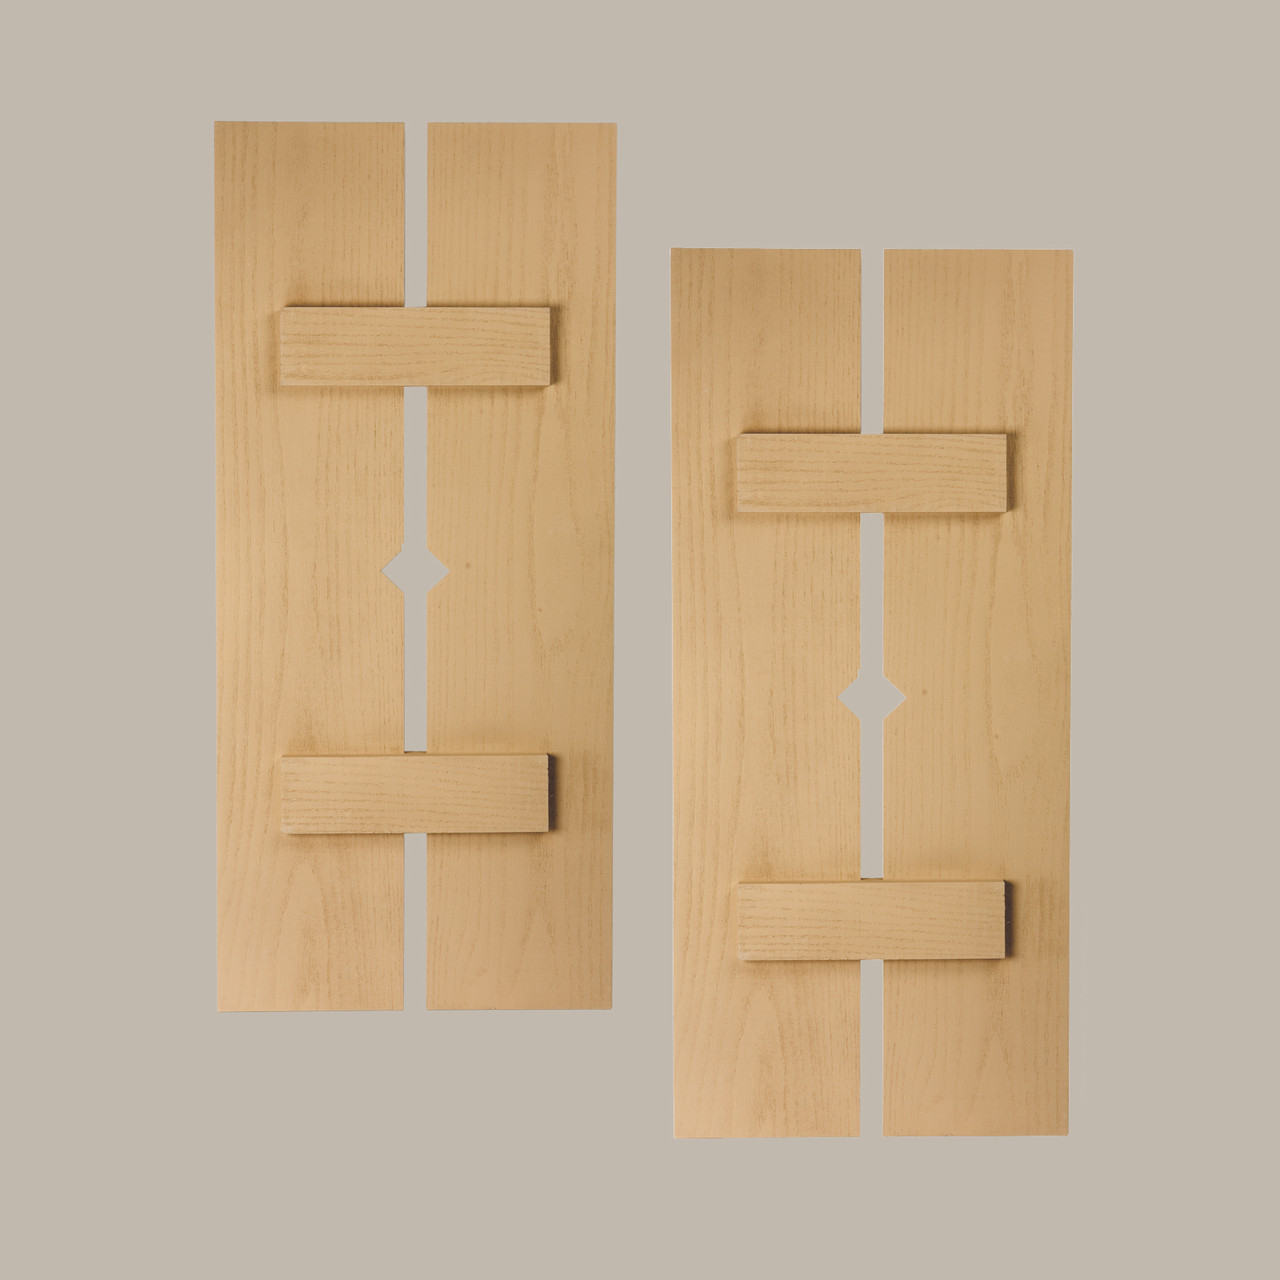 12 inch by 55 inch Plank Shutter with 2-Plank, Diamond